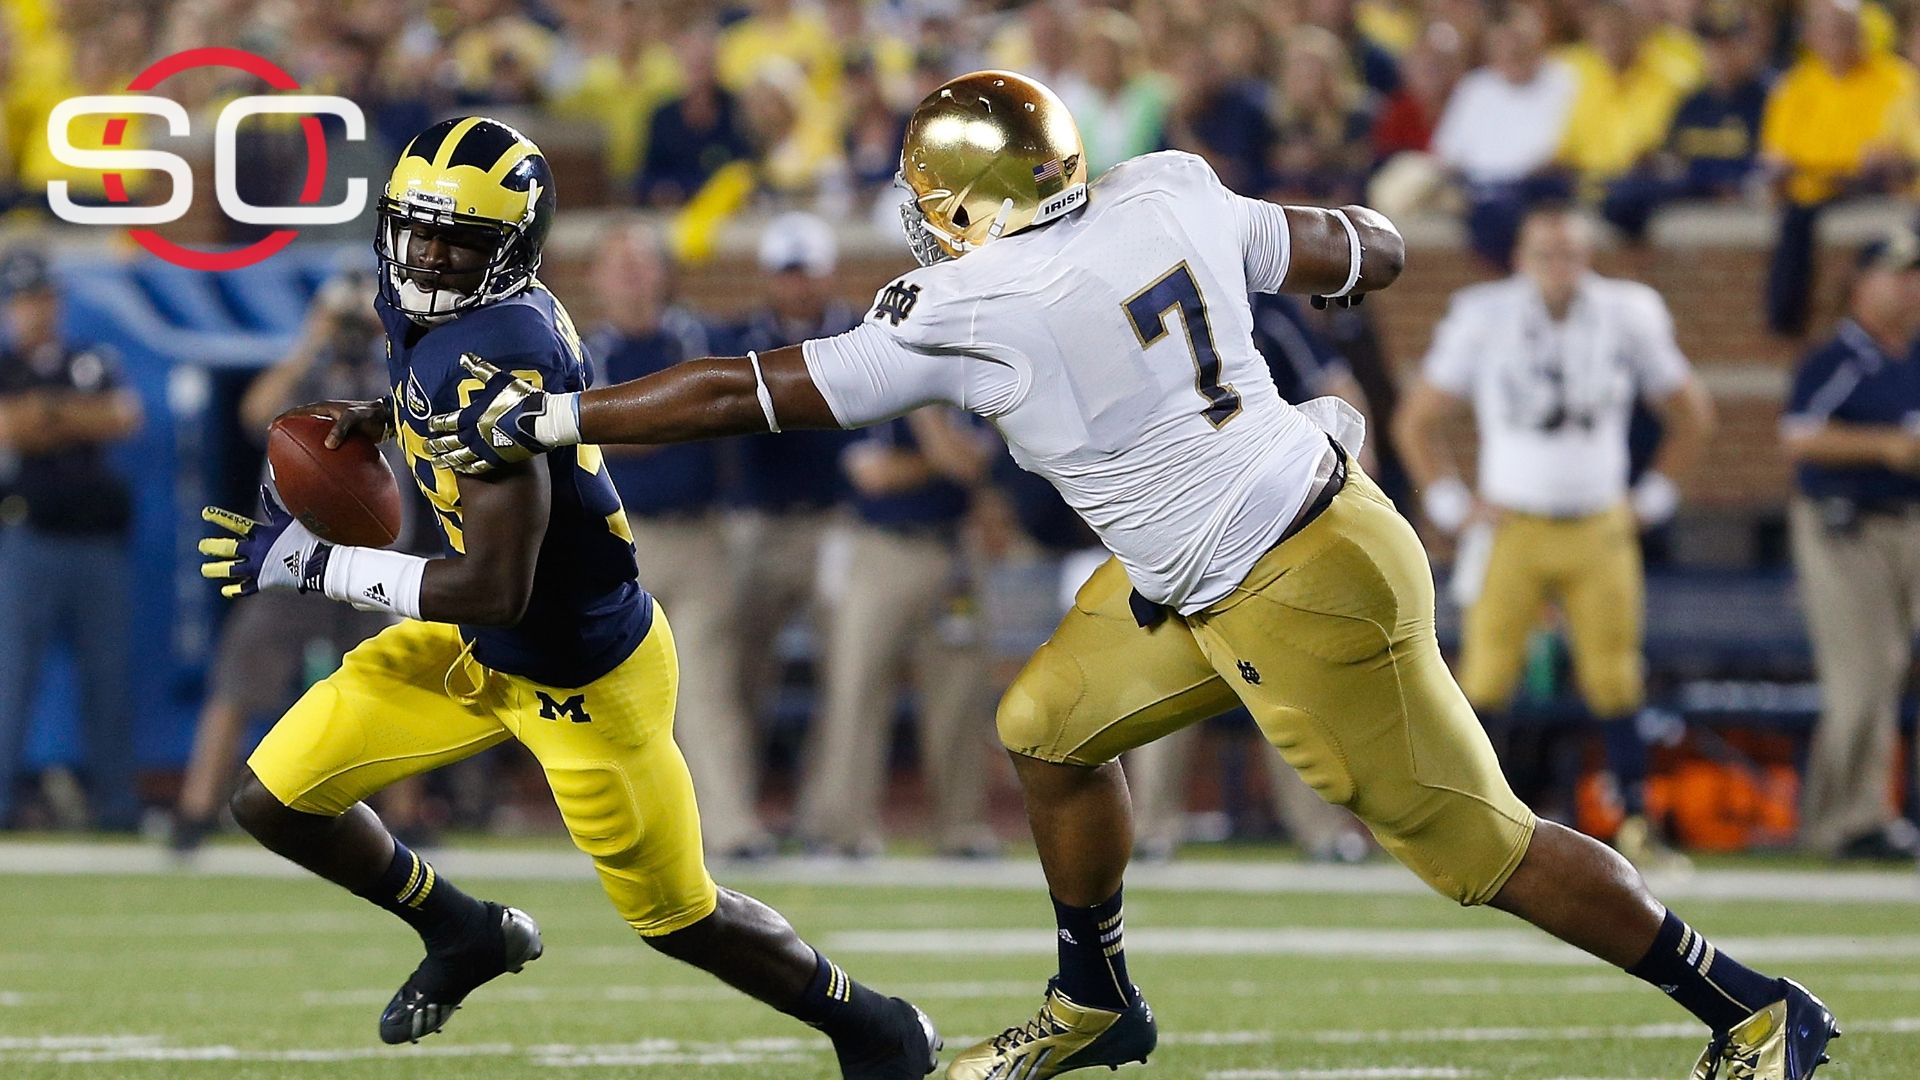 Could Michigan, Notre Dame renew football rivalry?